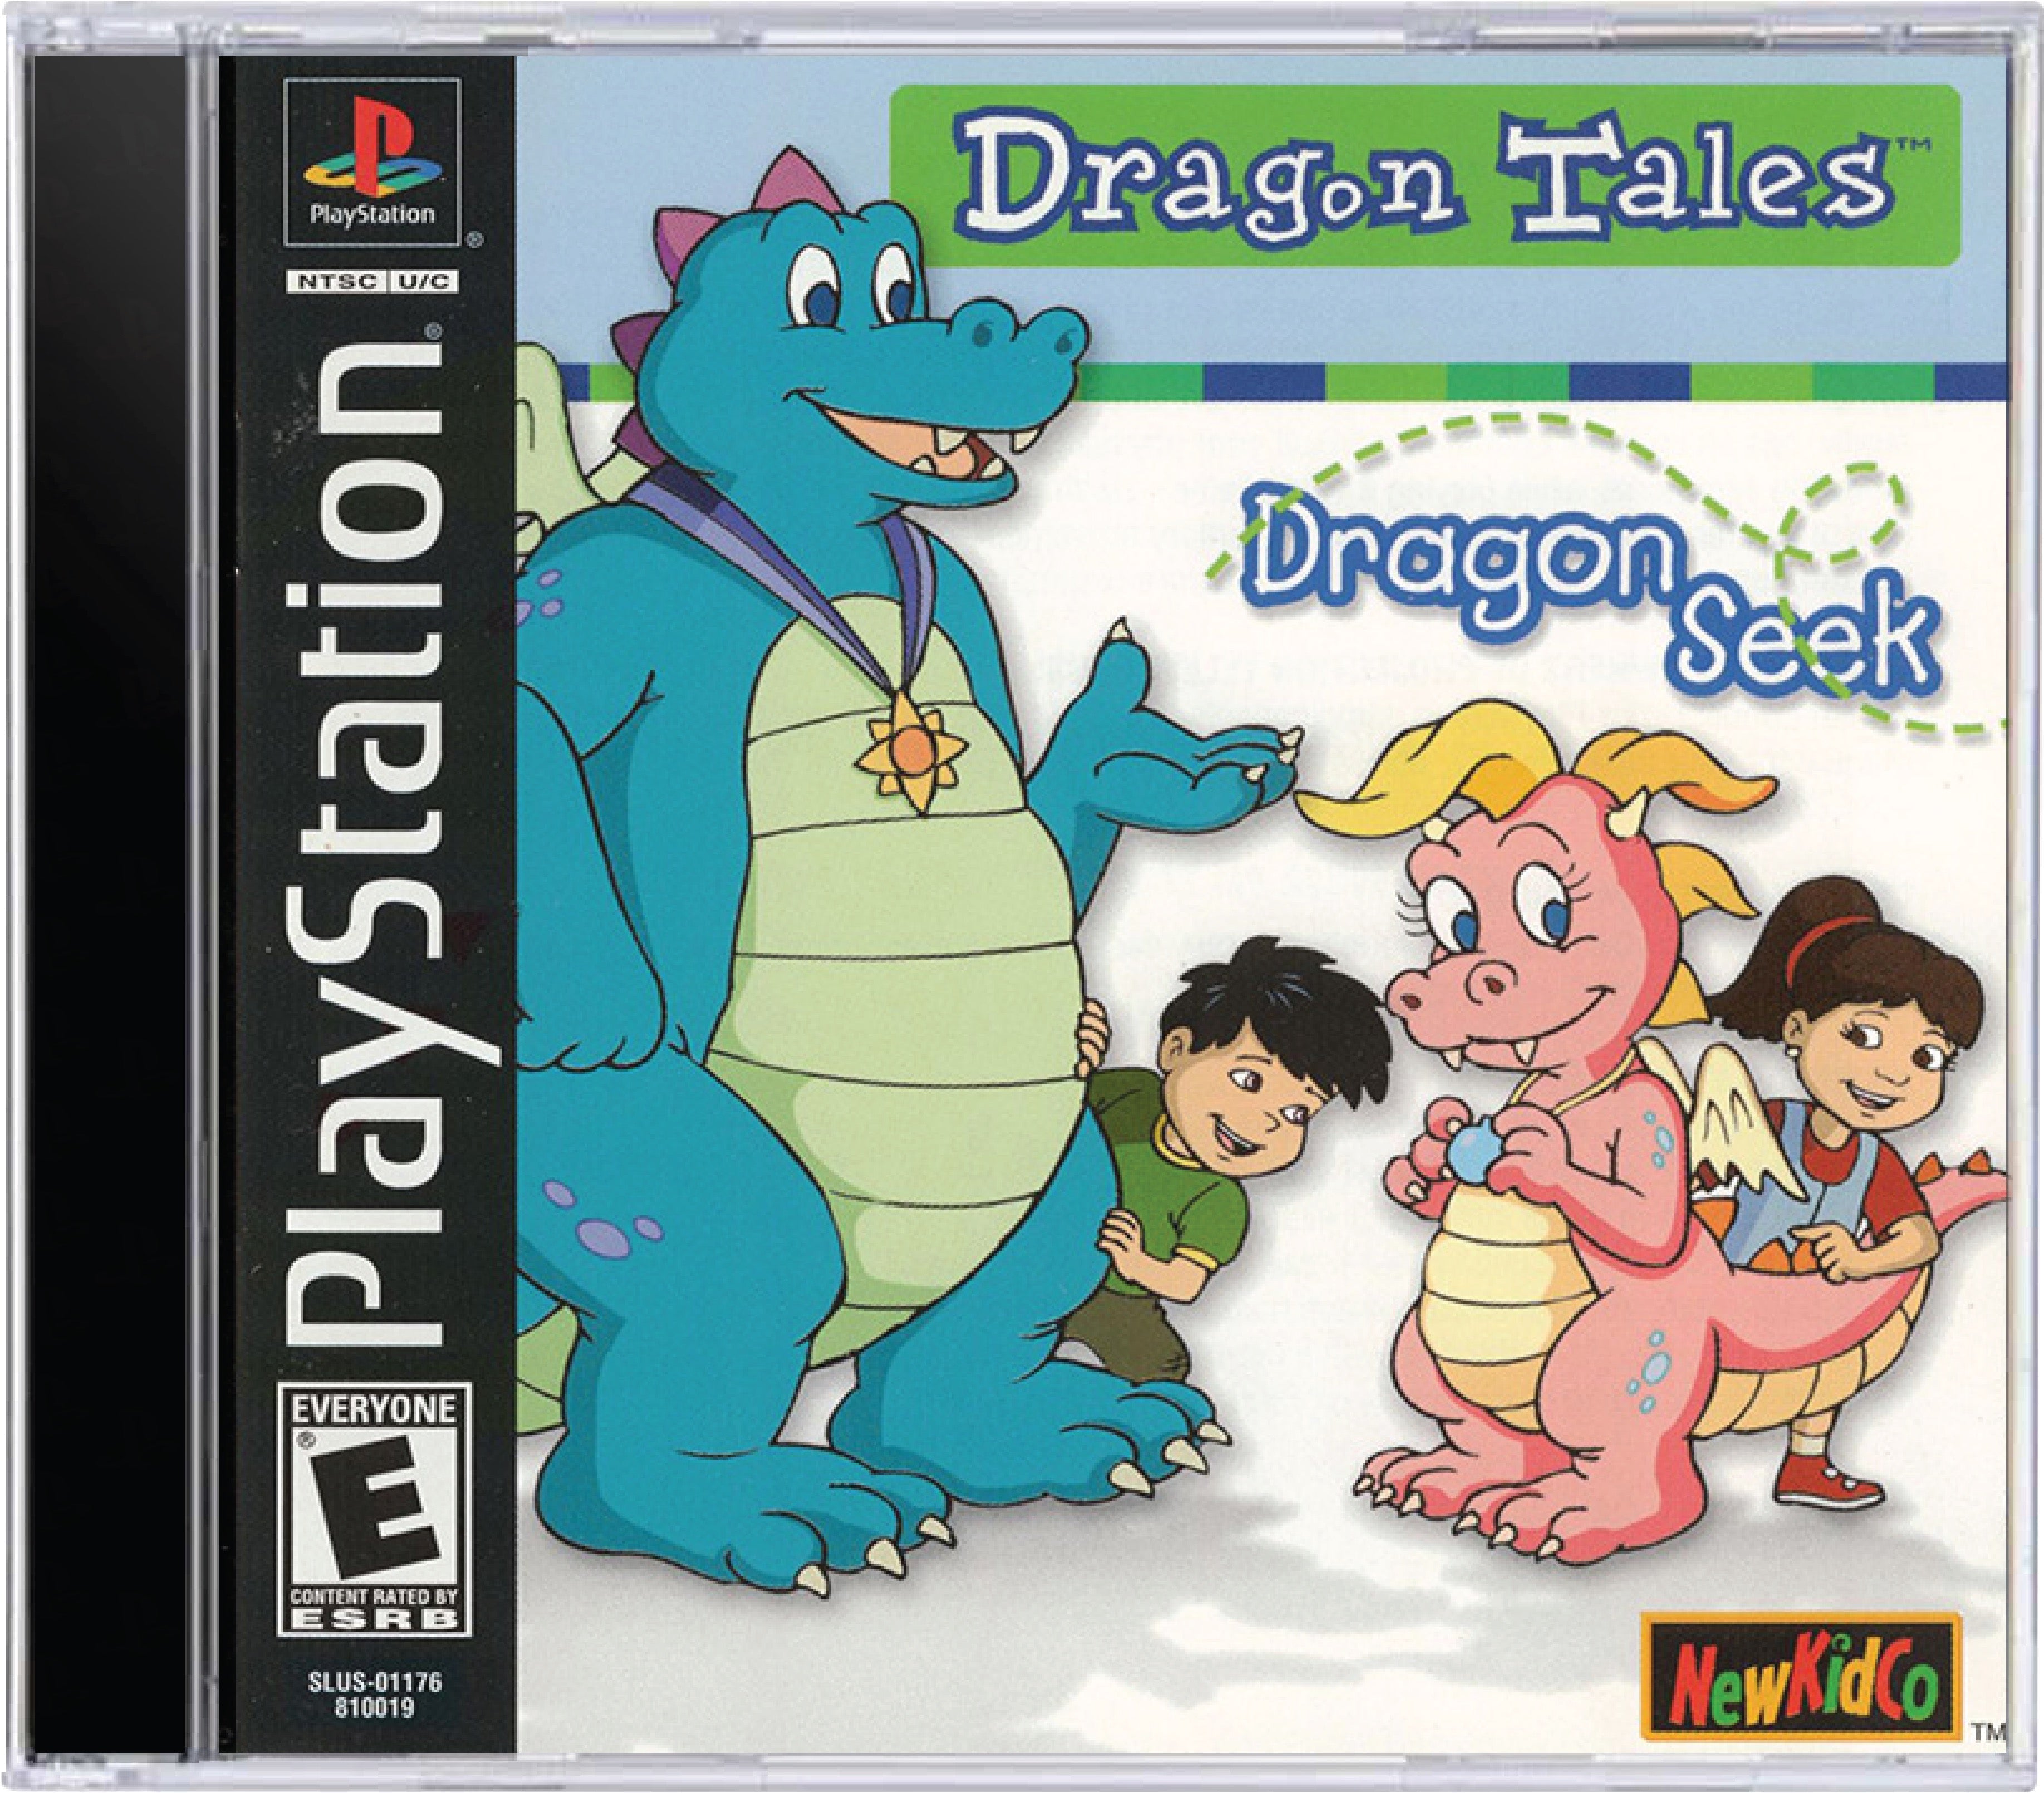 Dragon Tales Dragon Seek Cover Art and Product Photo